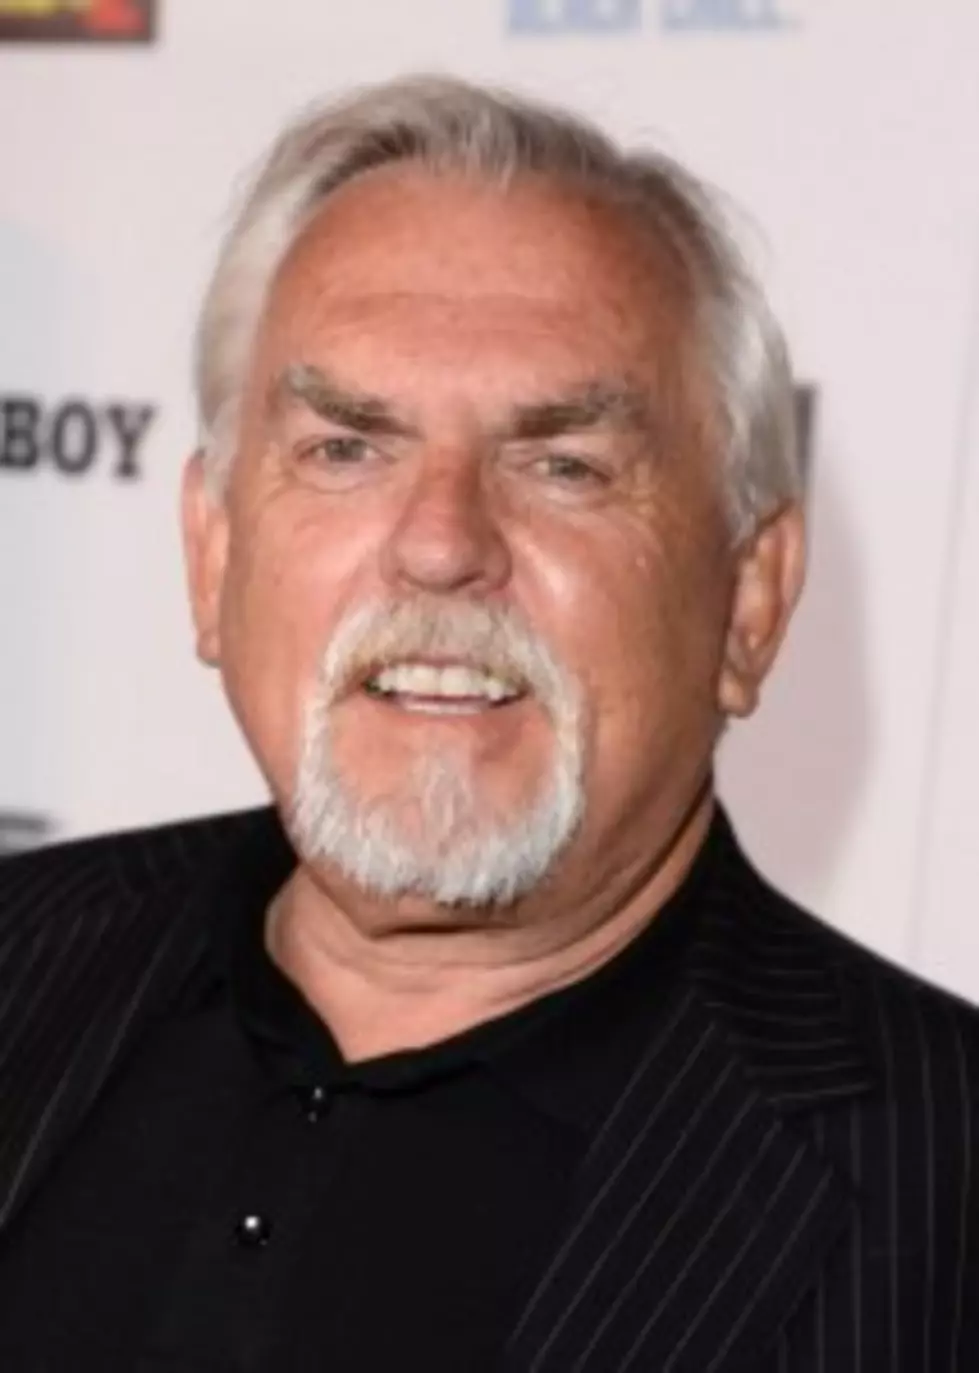 [AUDIO] Cheers and Toy Story Actor, John Ratzenberger Funding New TV Show